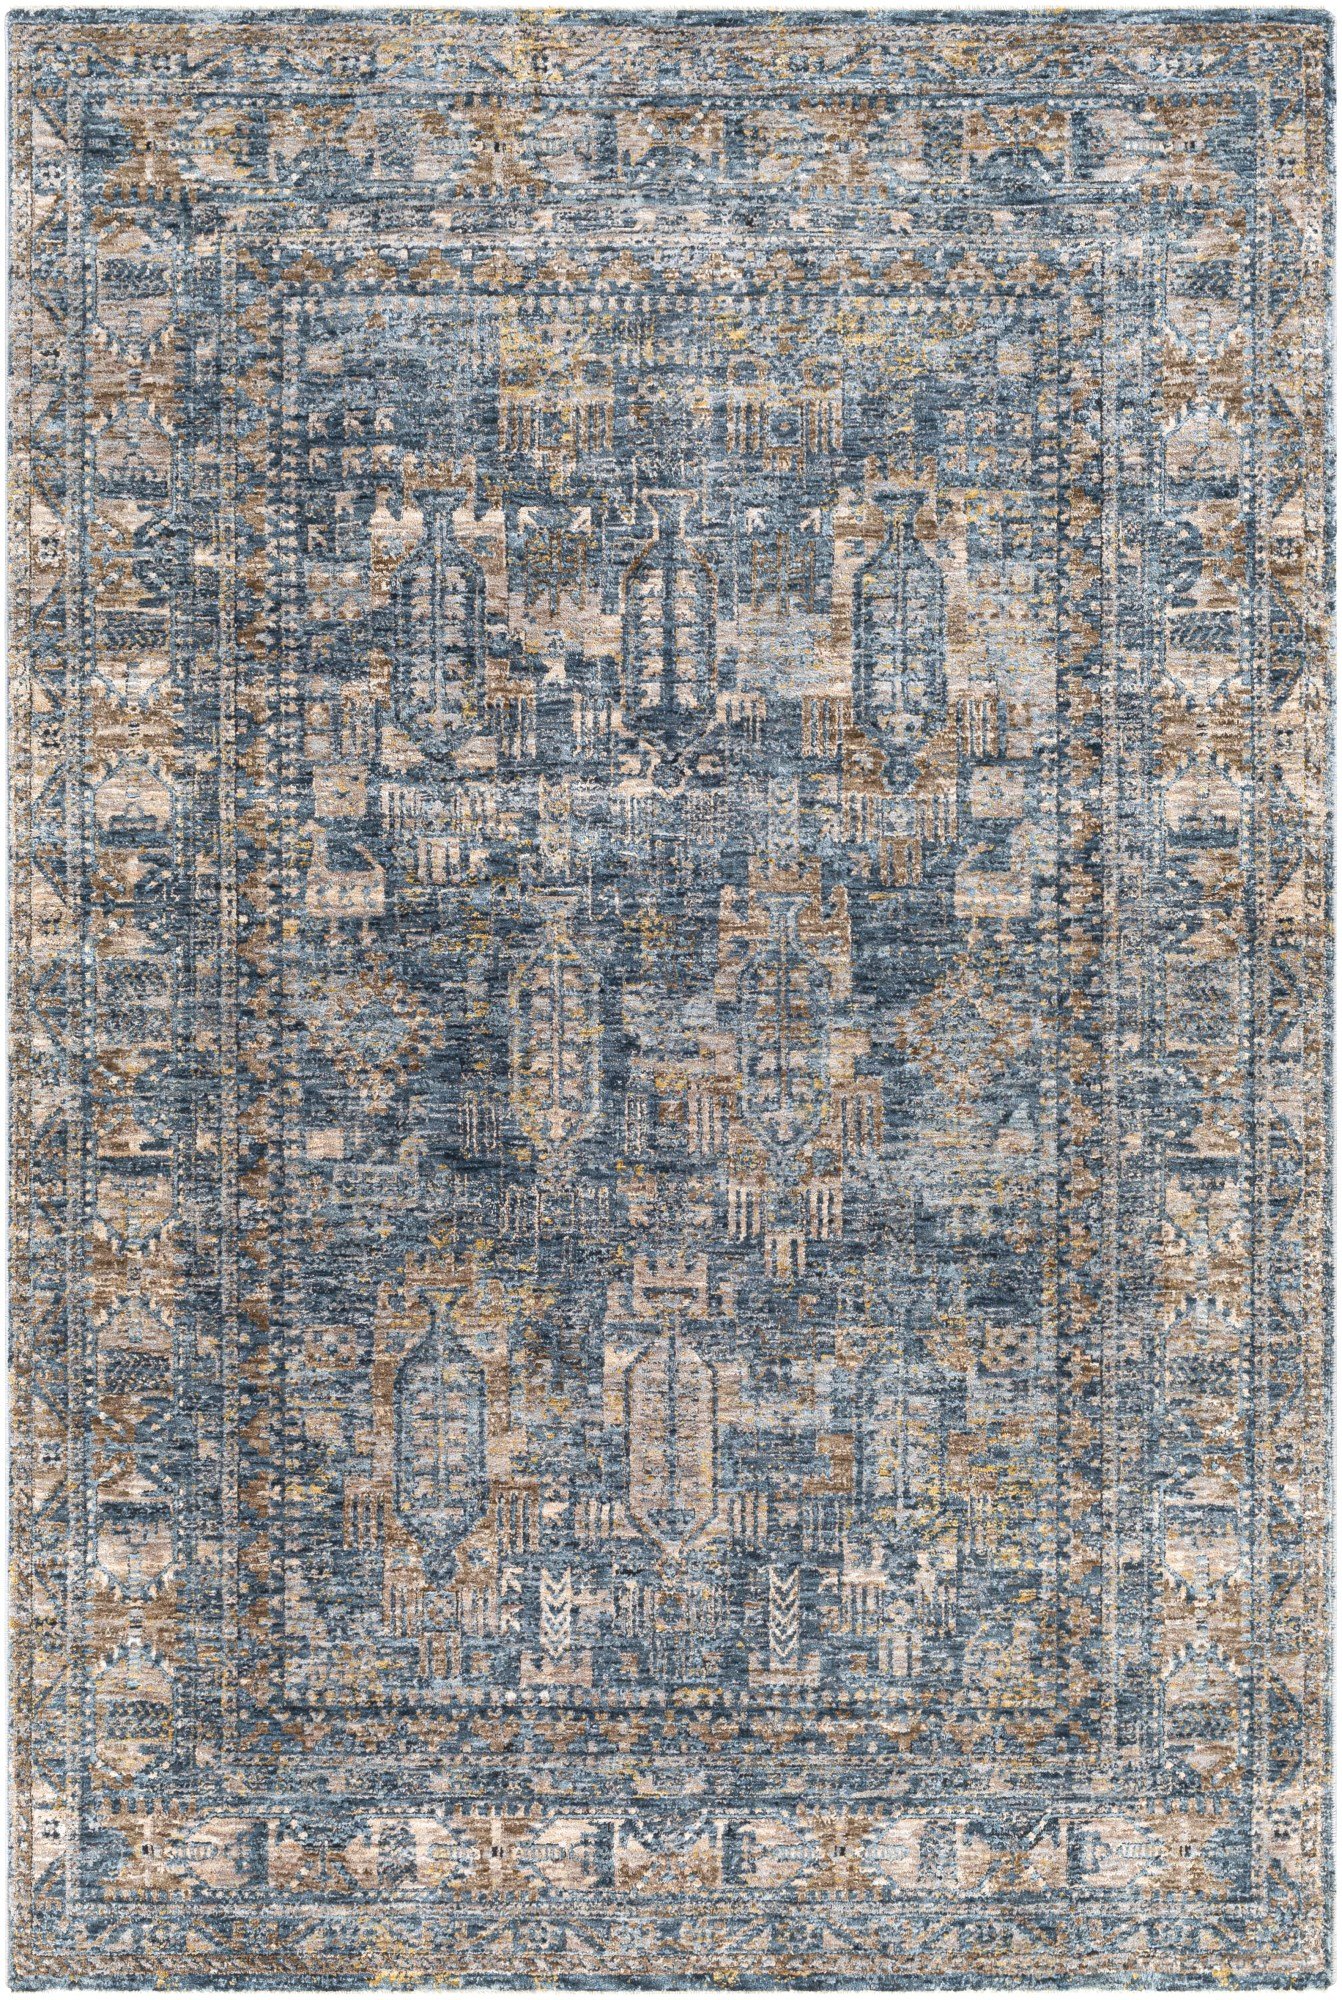 5x7 And 5x8 Blue Area Rugs Direct, Dark Blue Area Rug 5 215 700